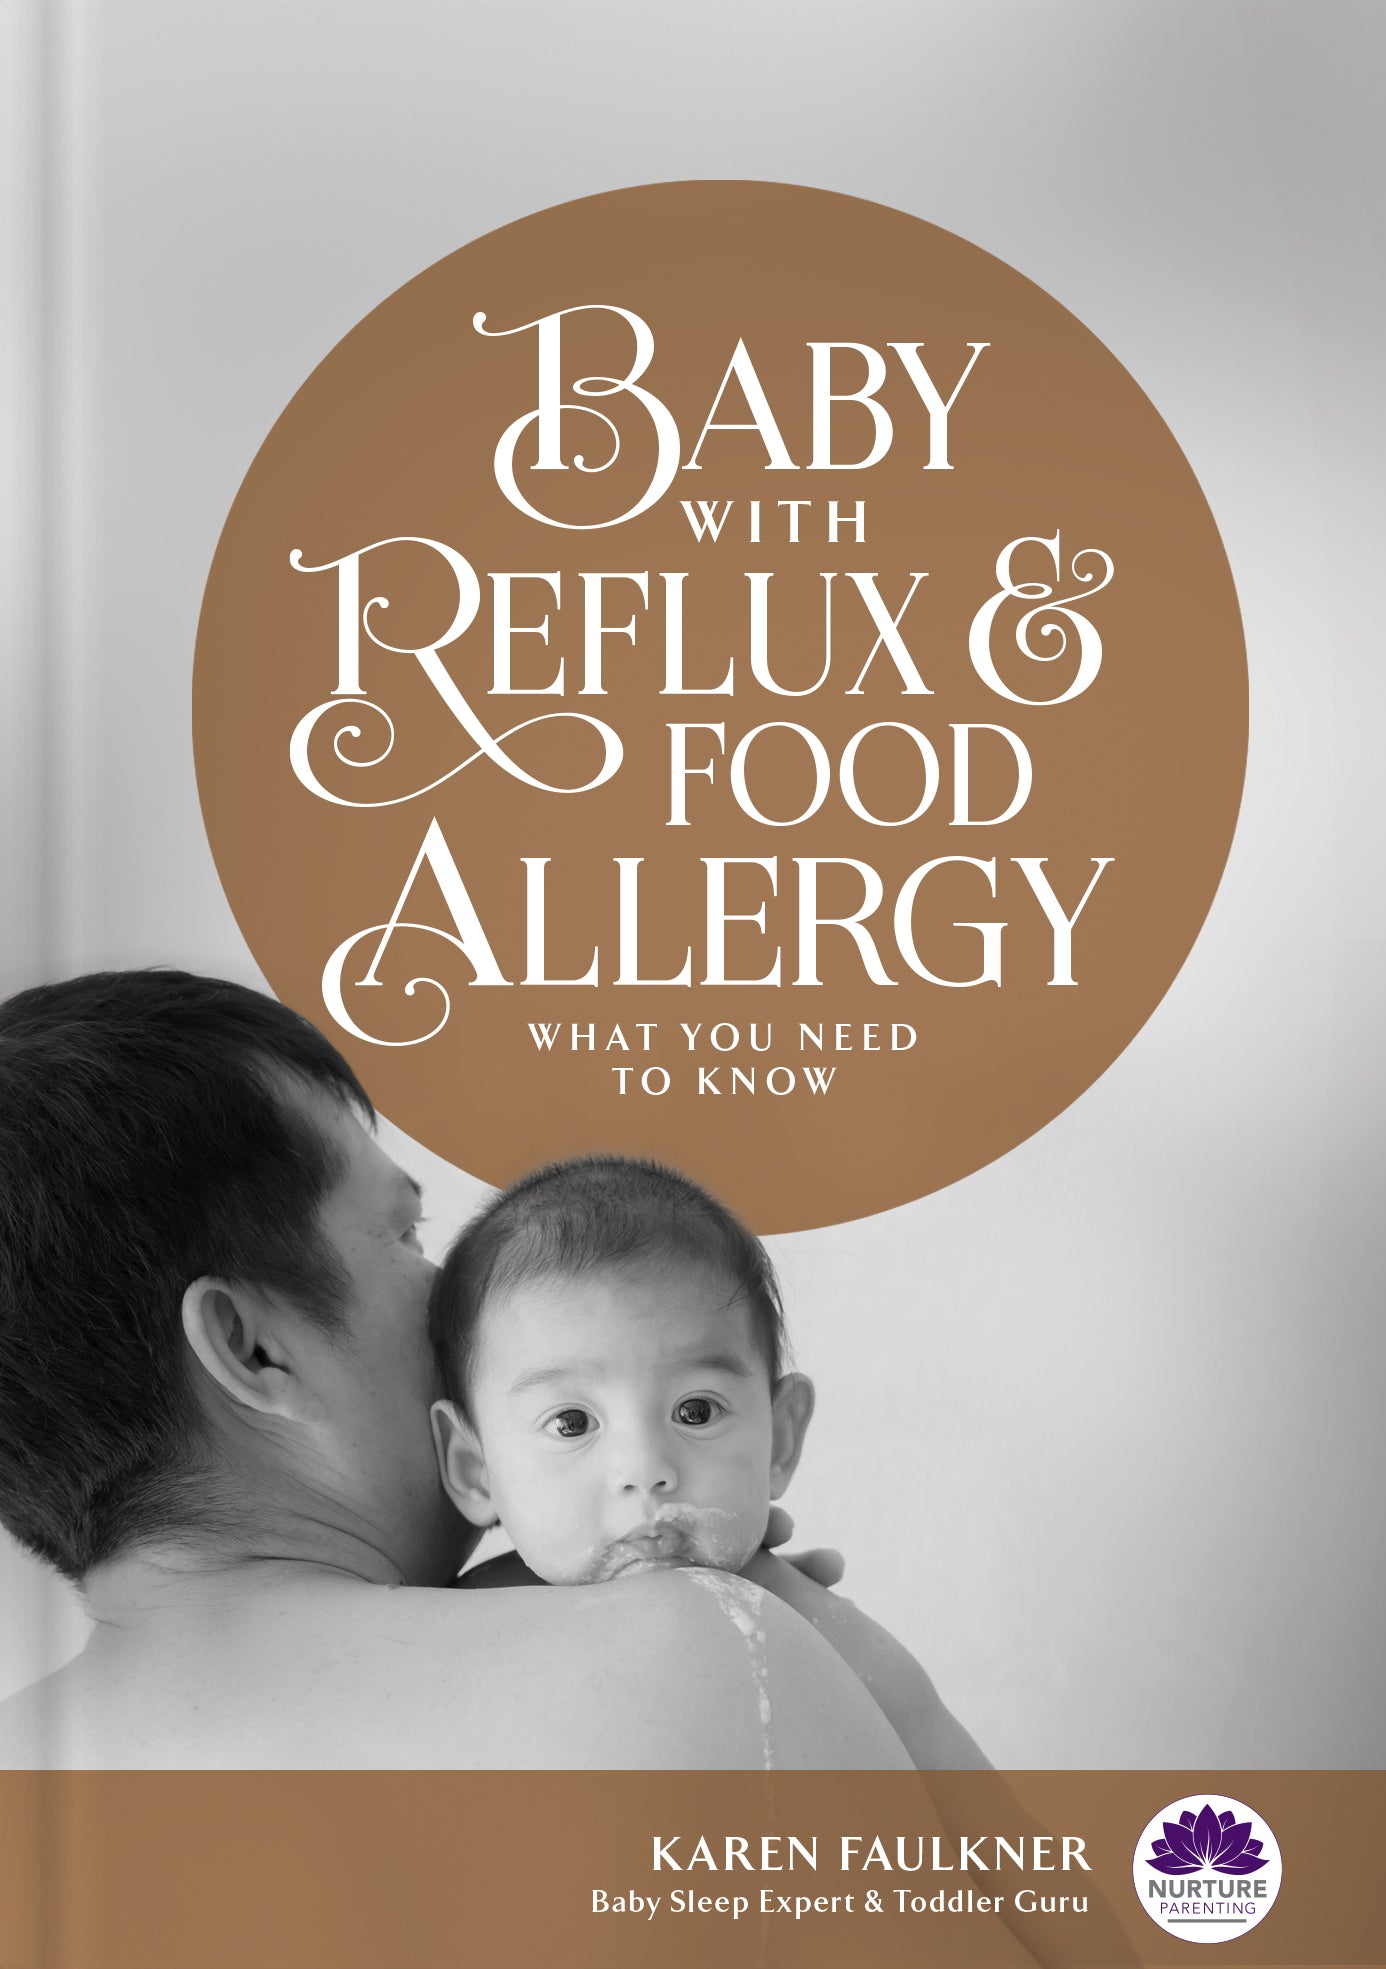 reflux, food allergy, eczema, baby sleep, cows milk protein allergy, sleep, food allergy, baby has reflux, baby vomiting, eczema, cows milk protein allergy, cows milk protein intolerance, unhappy baby, baby colic, baby crying, unsettled baby